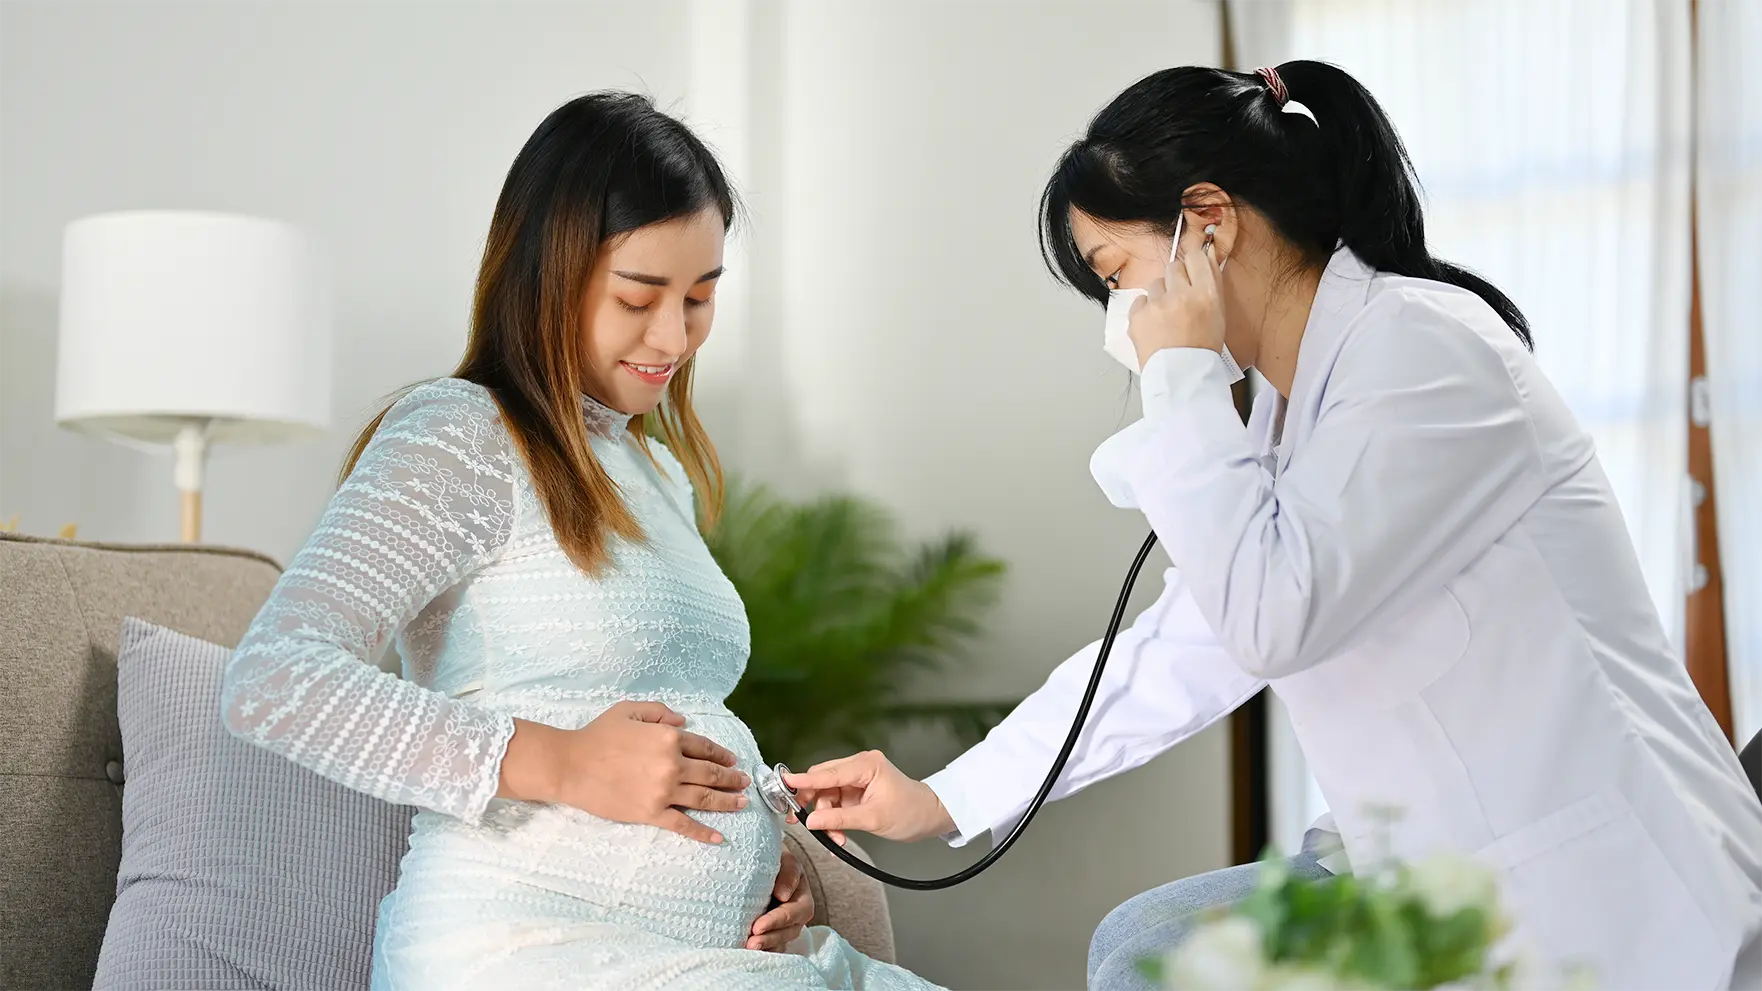 Obstetrician performing a prenatal checkup on a pregnant woman